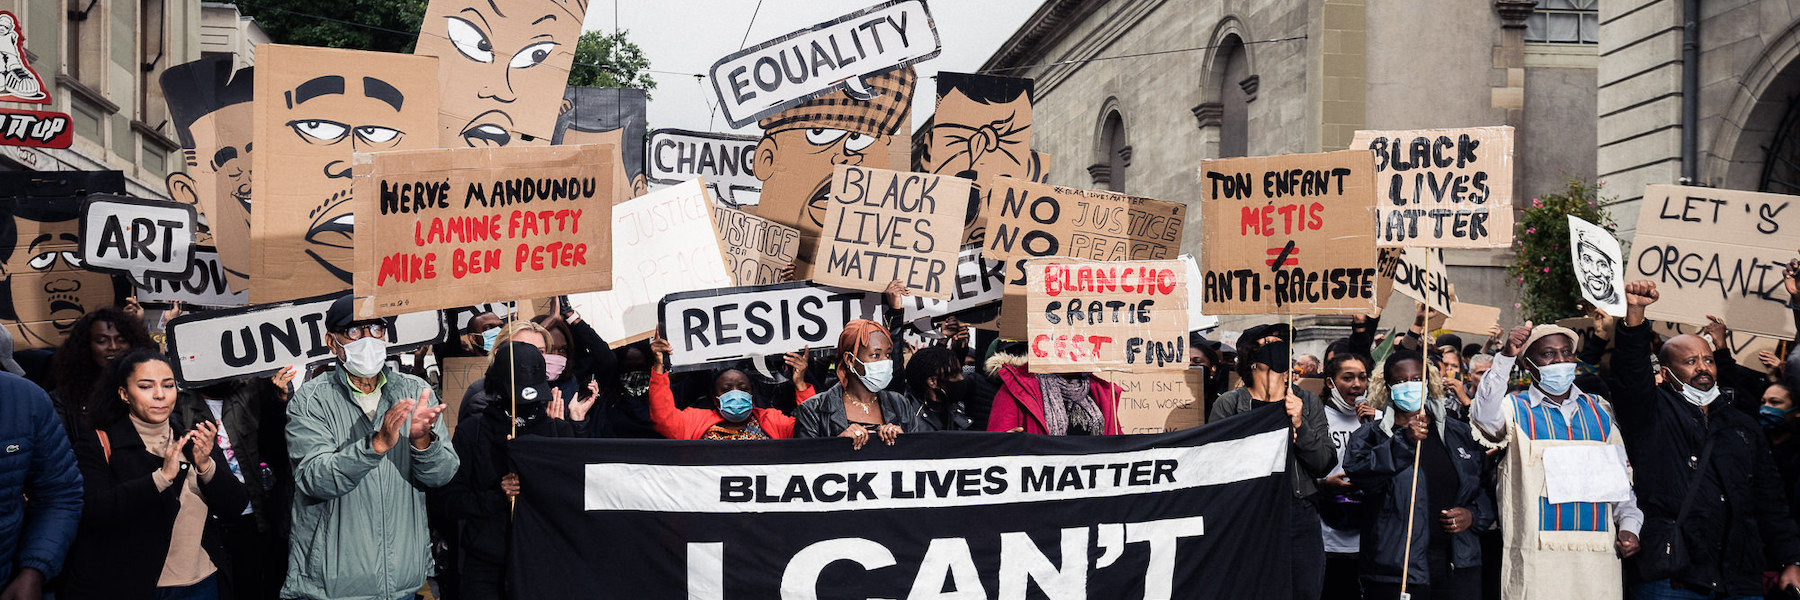 On the image you see many people holding sign like "Black lives matter", "Equality", "Blanchocratie c'est fini" and others. There is a big black banner with white text written "Black lives matter, I can't breath".